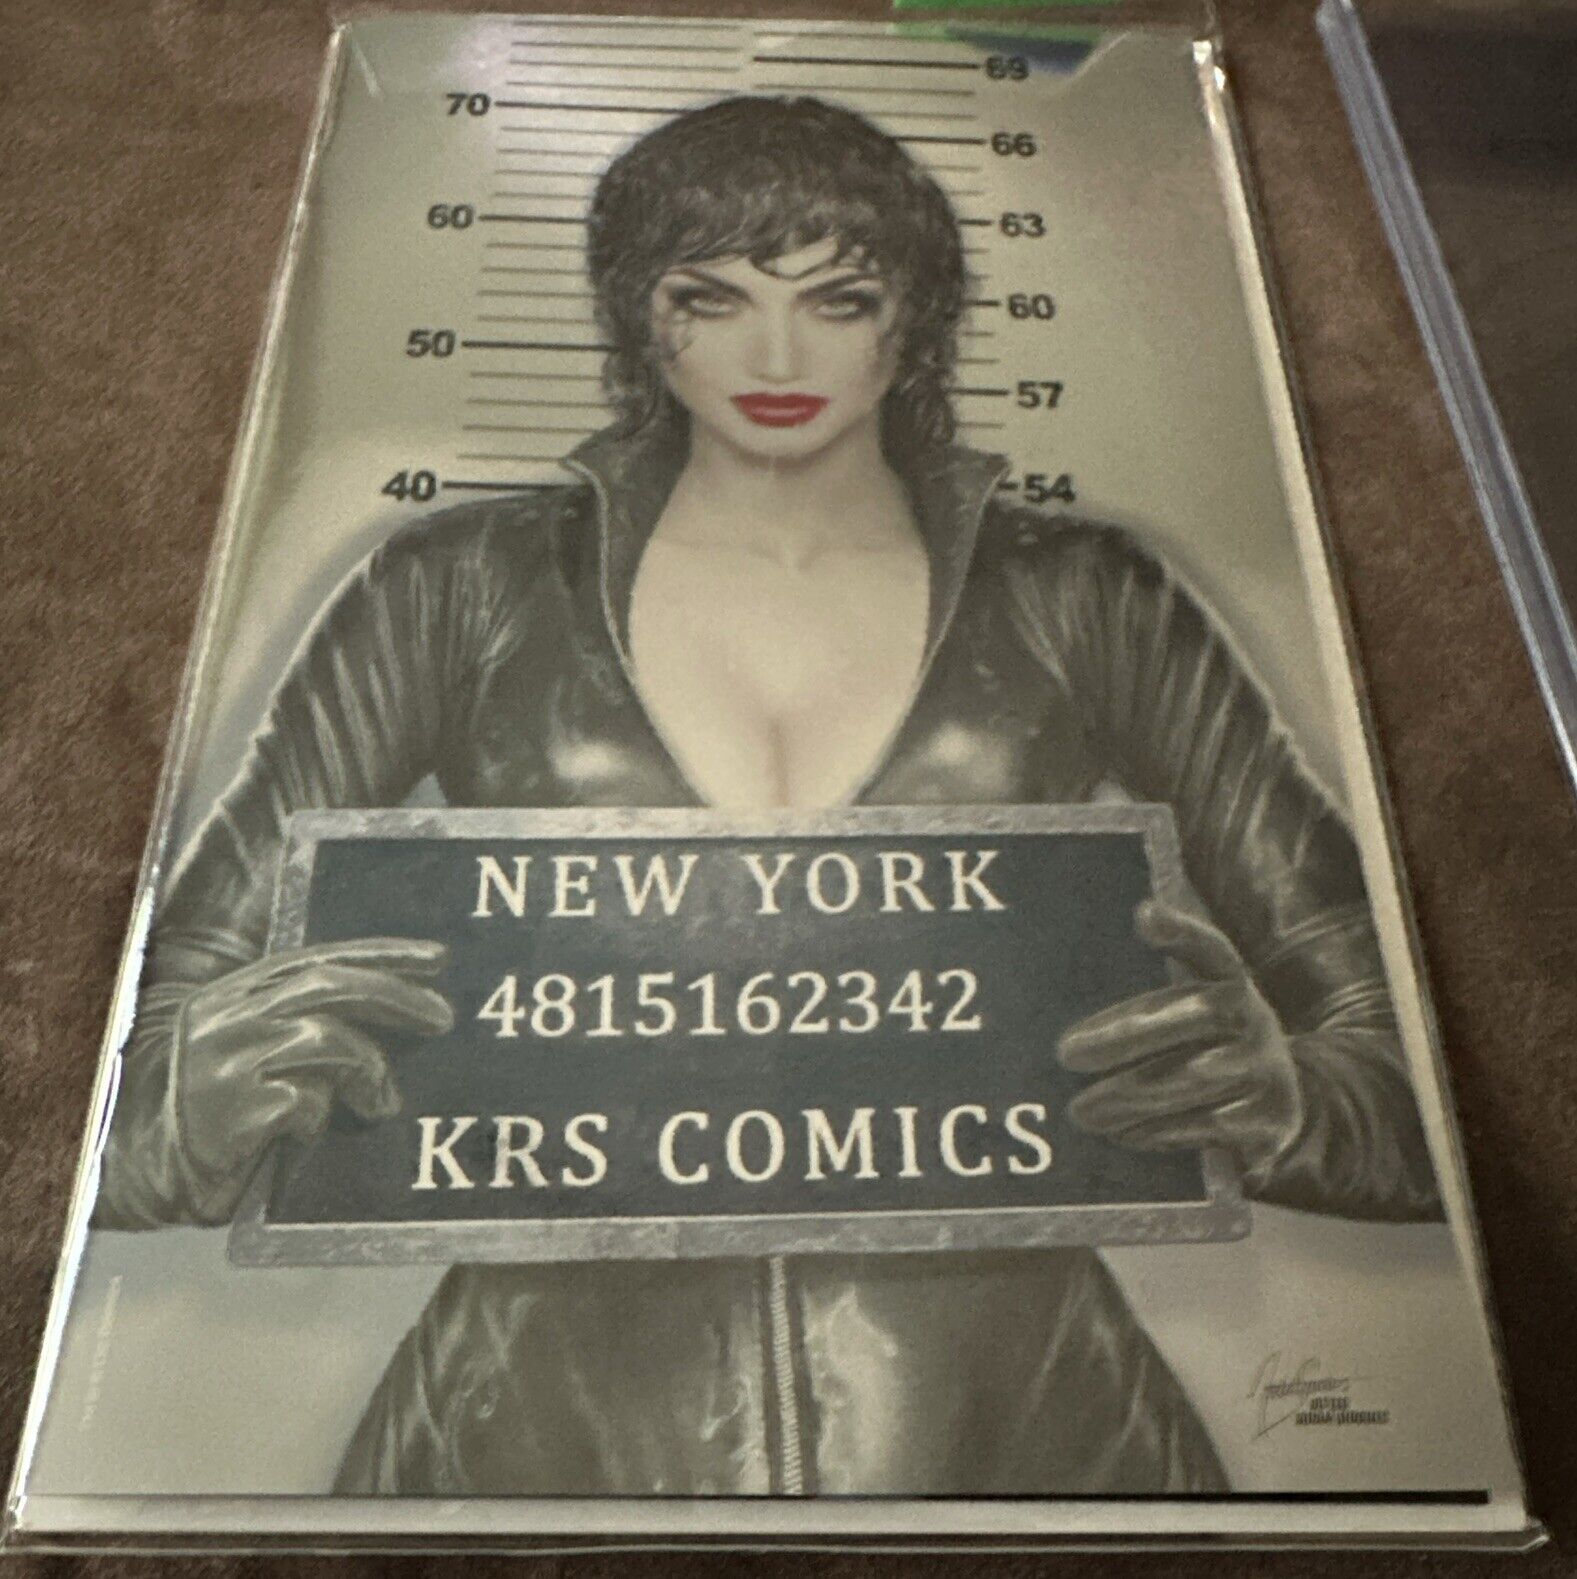 CATWOMAN #47- NYCC 2022 Exclusive FOIL Natali Sanders Cover- LTD To ONLY 1000 